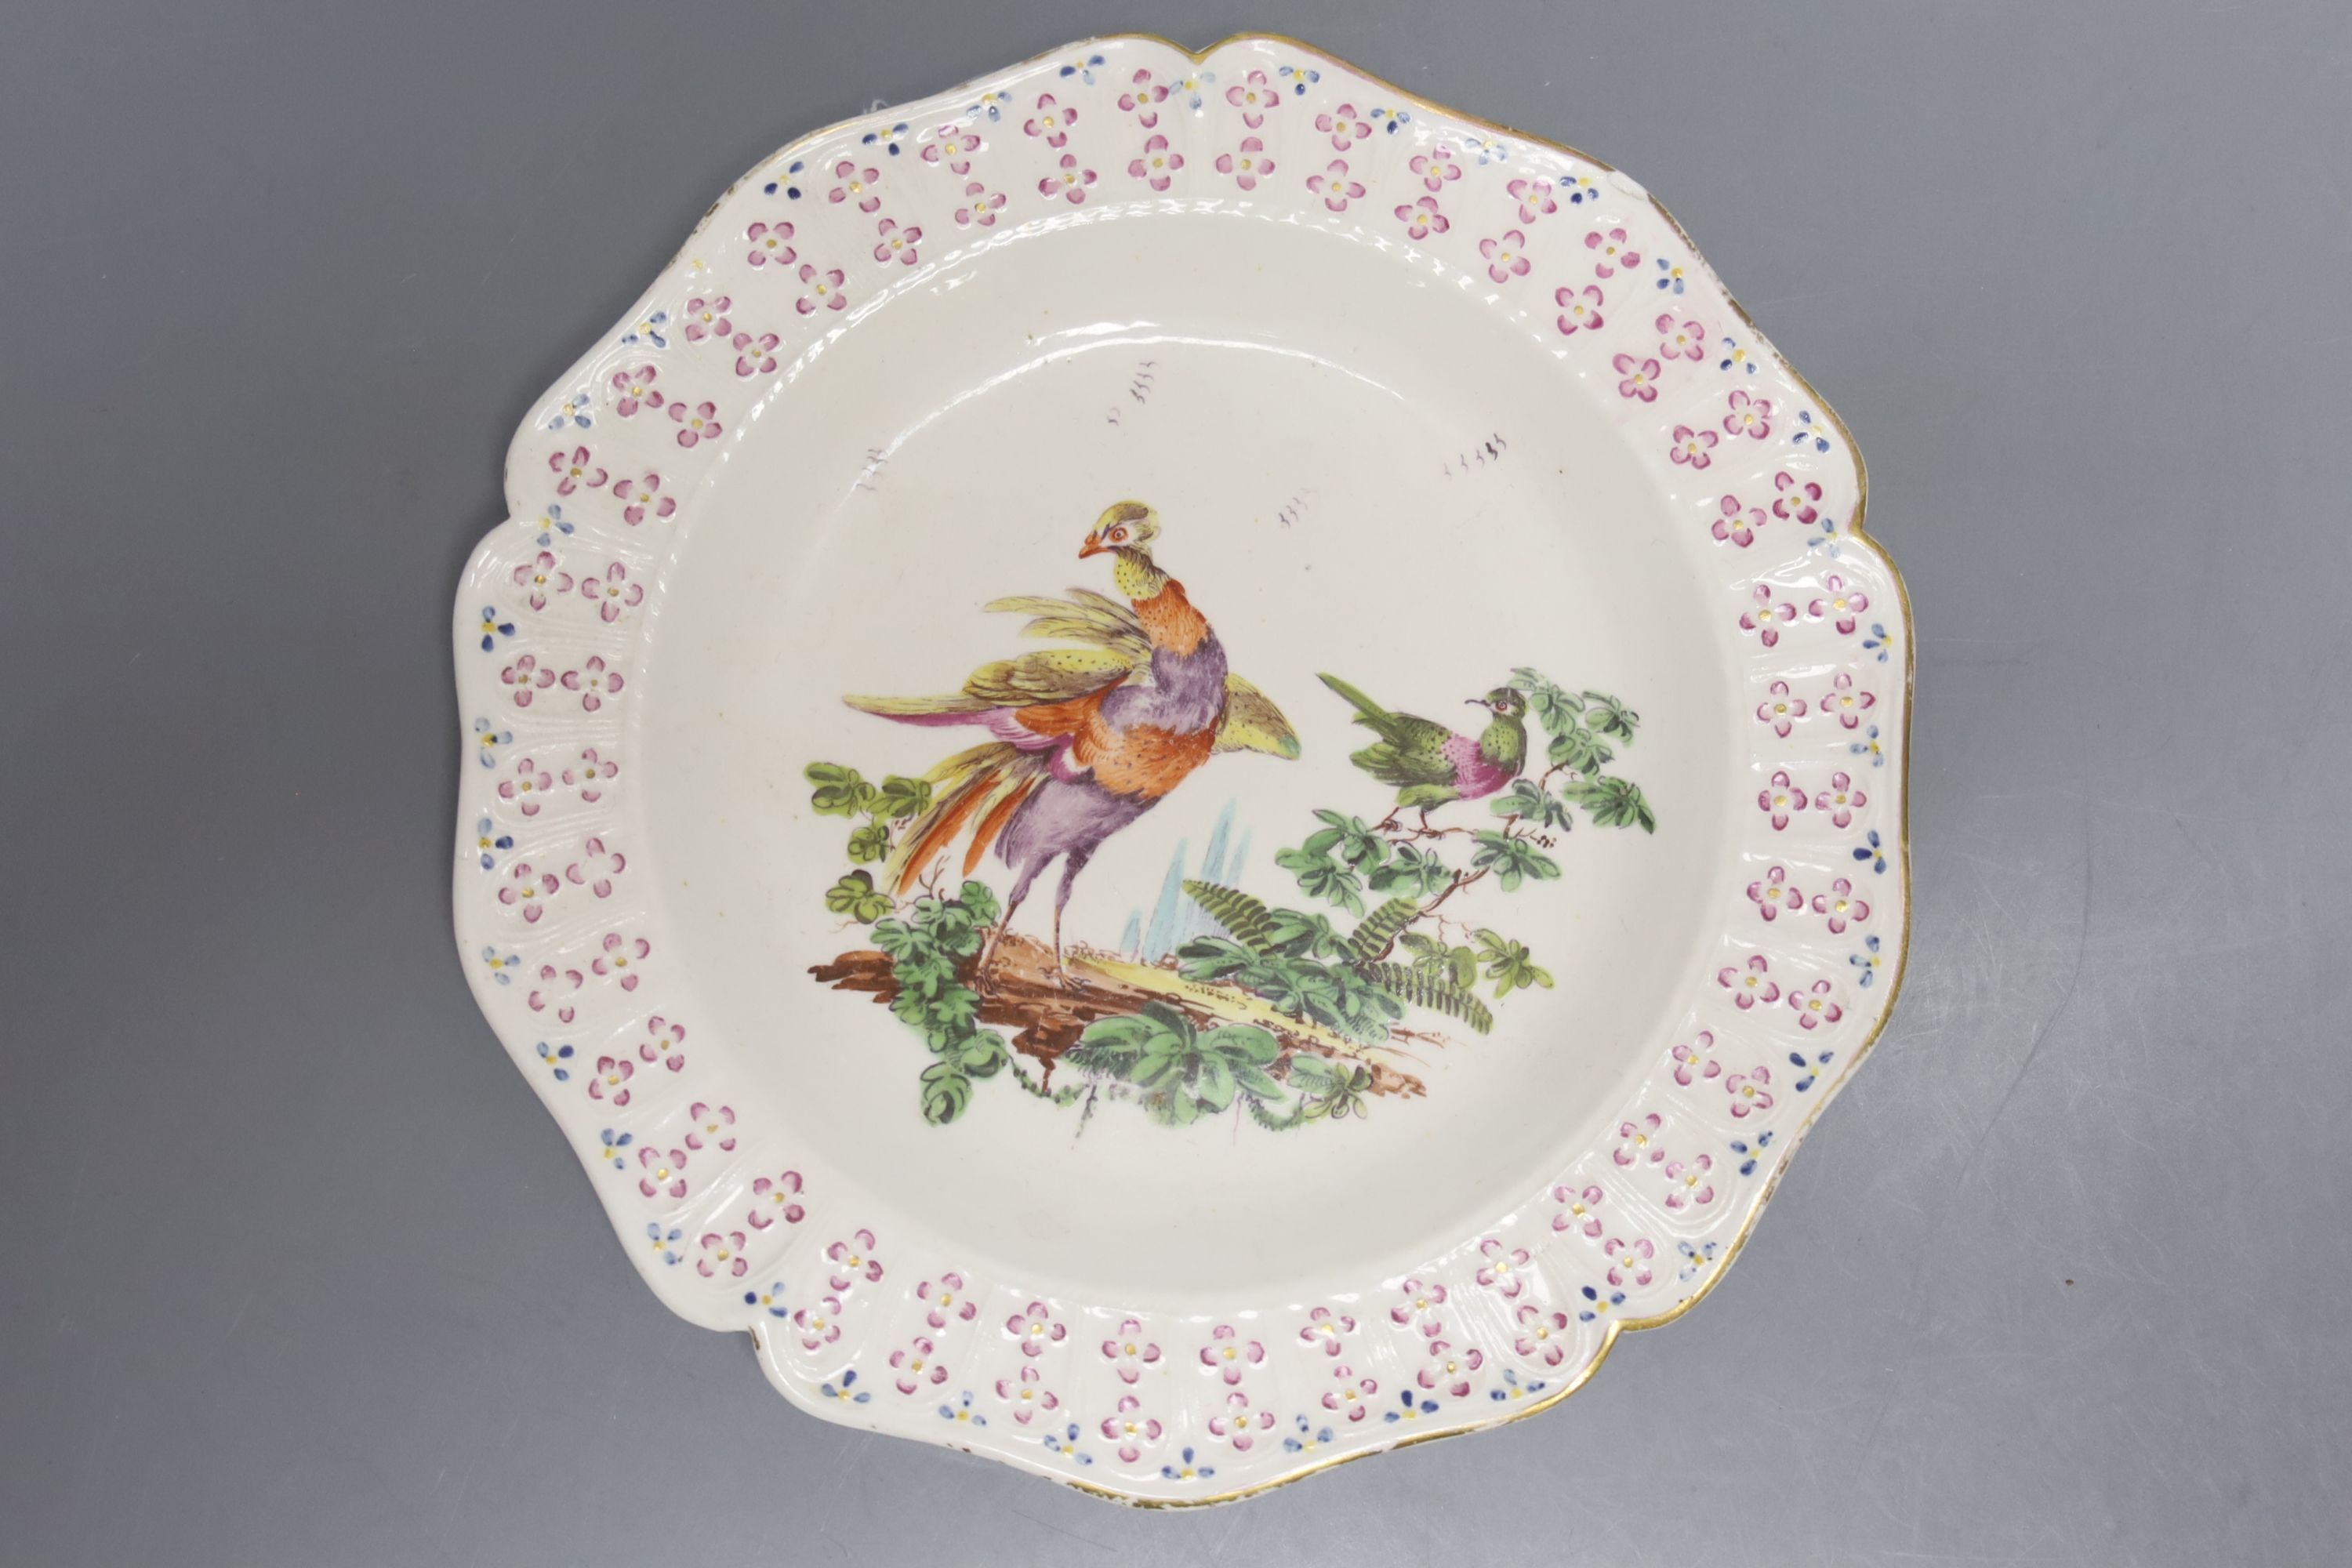 A Derby plate painted with two birds in landscape under a moulded floral border c.1760, Wheeldon Col. label, diameter 21.5cm